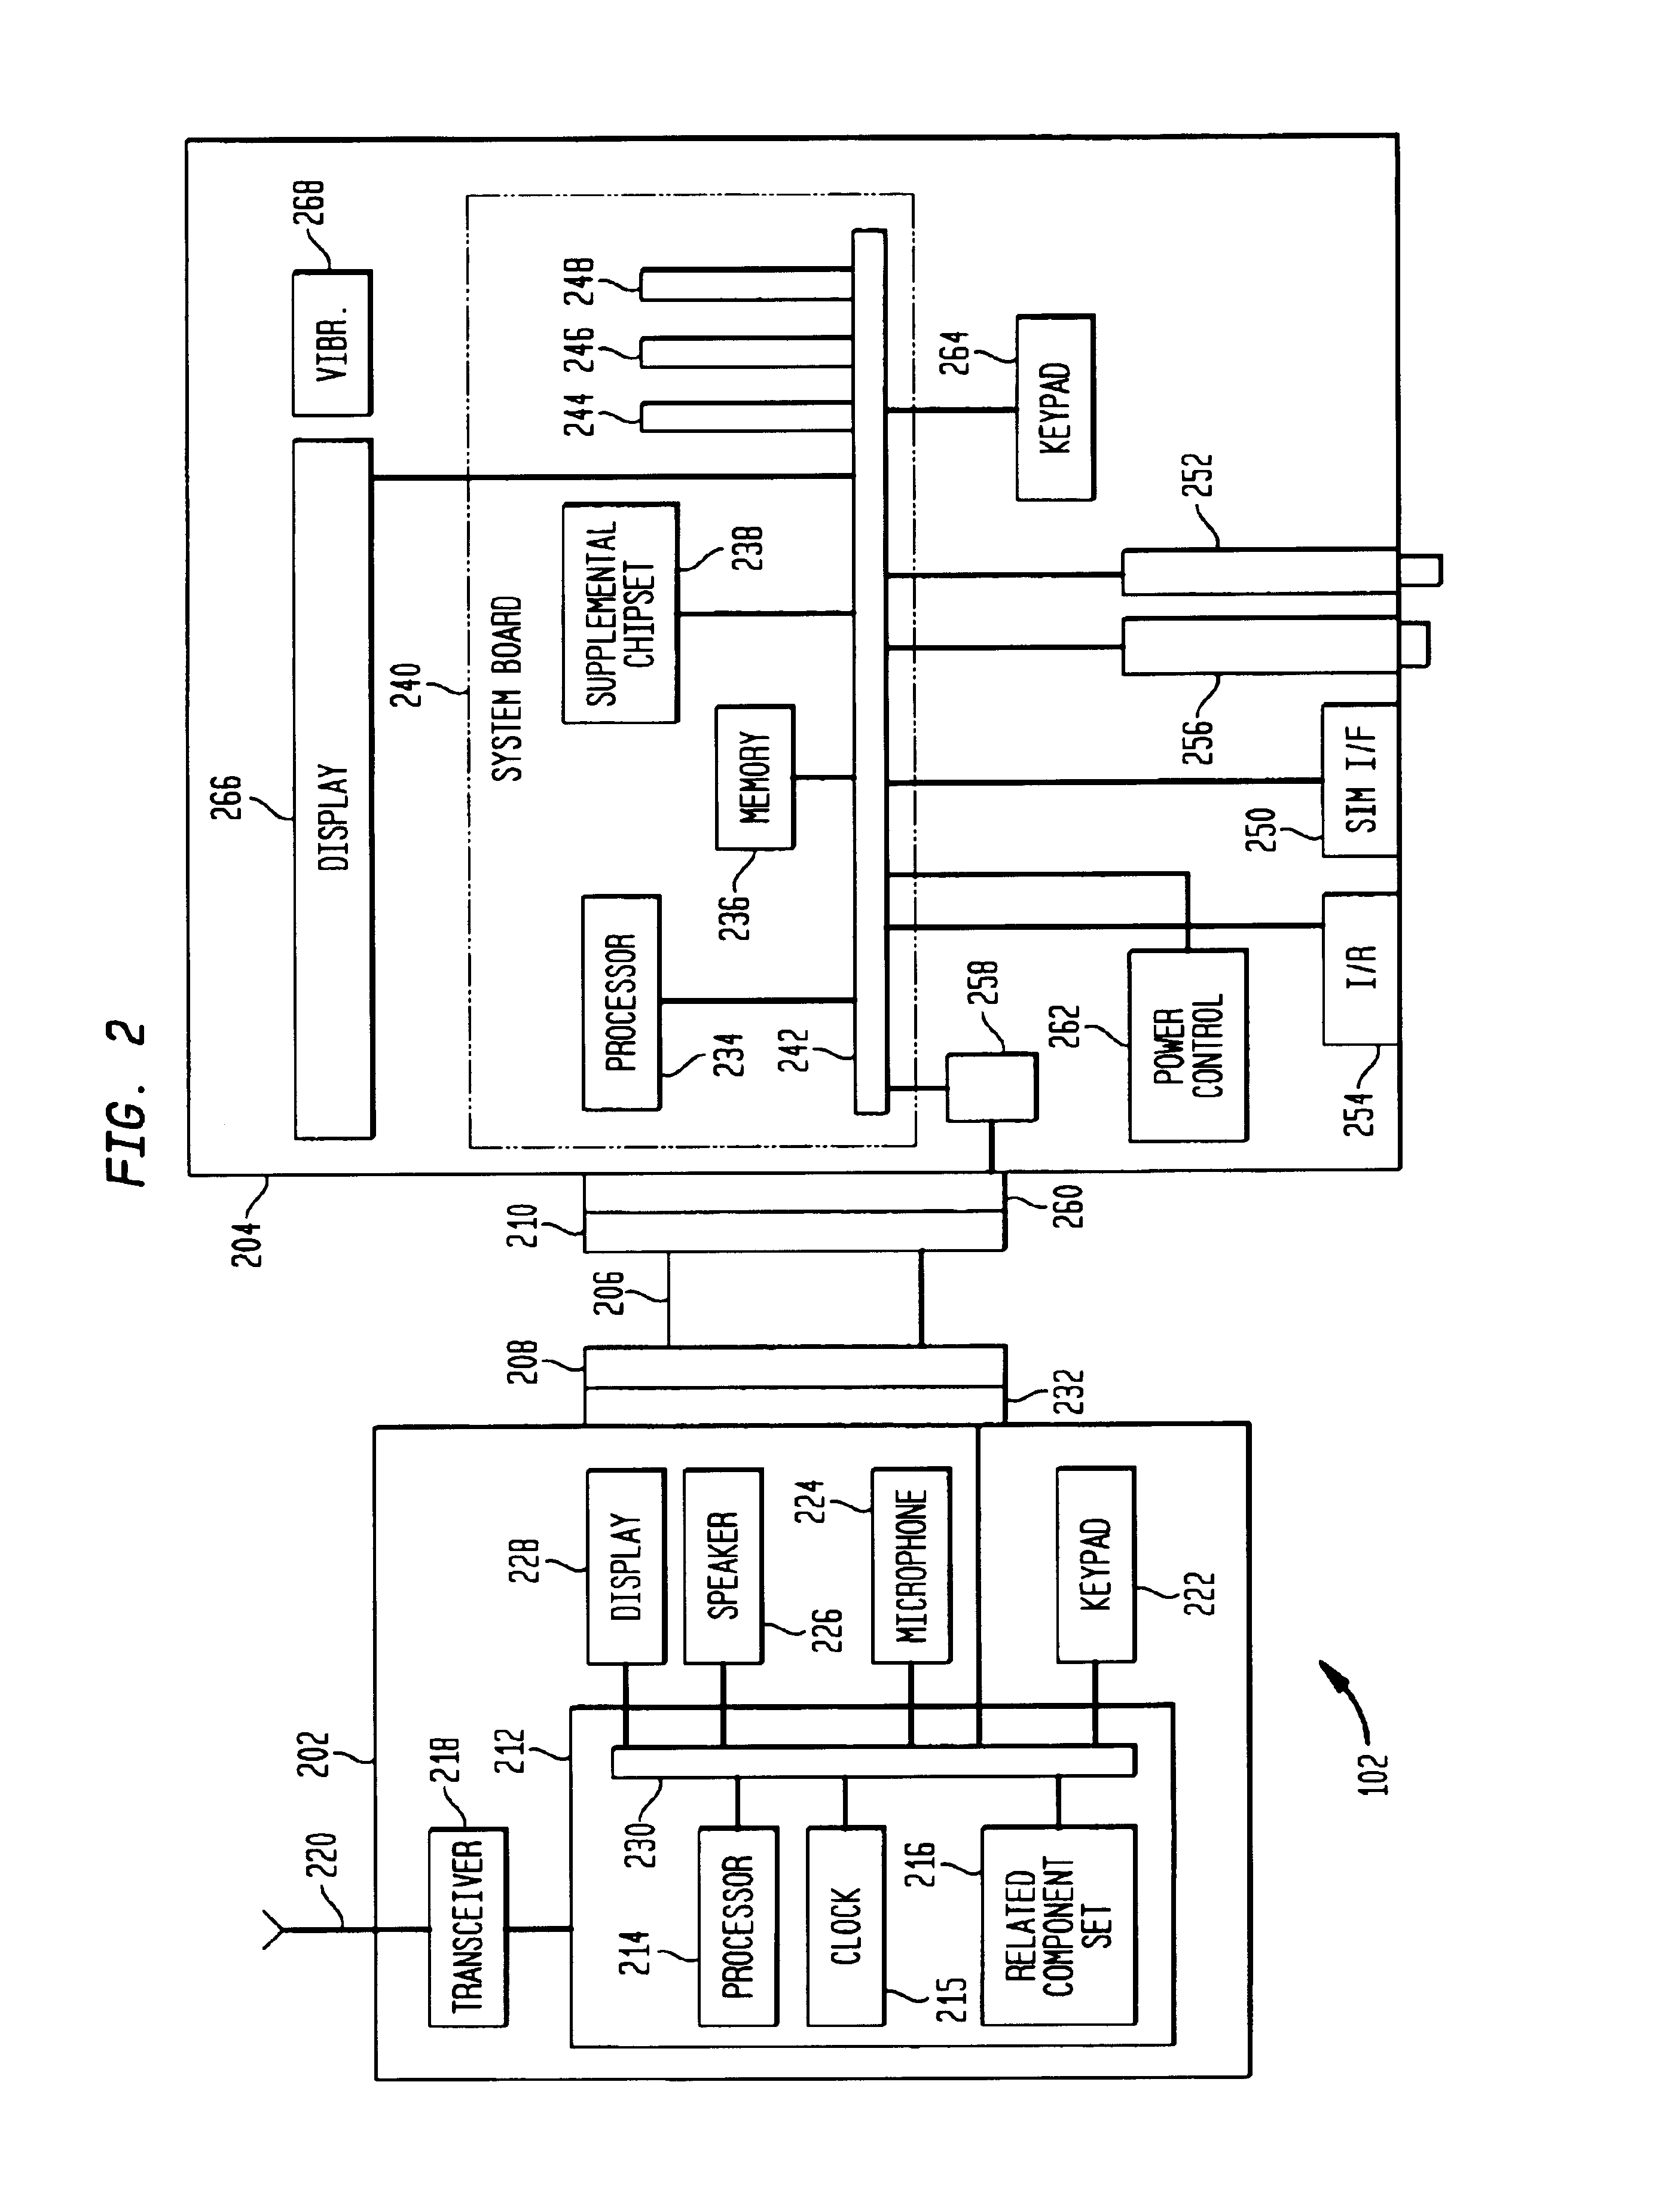 Methods and apparatus for modularization of real time and task oriented features in wireless communications